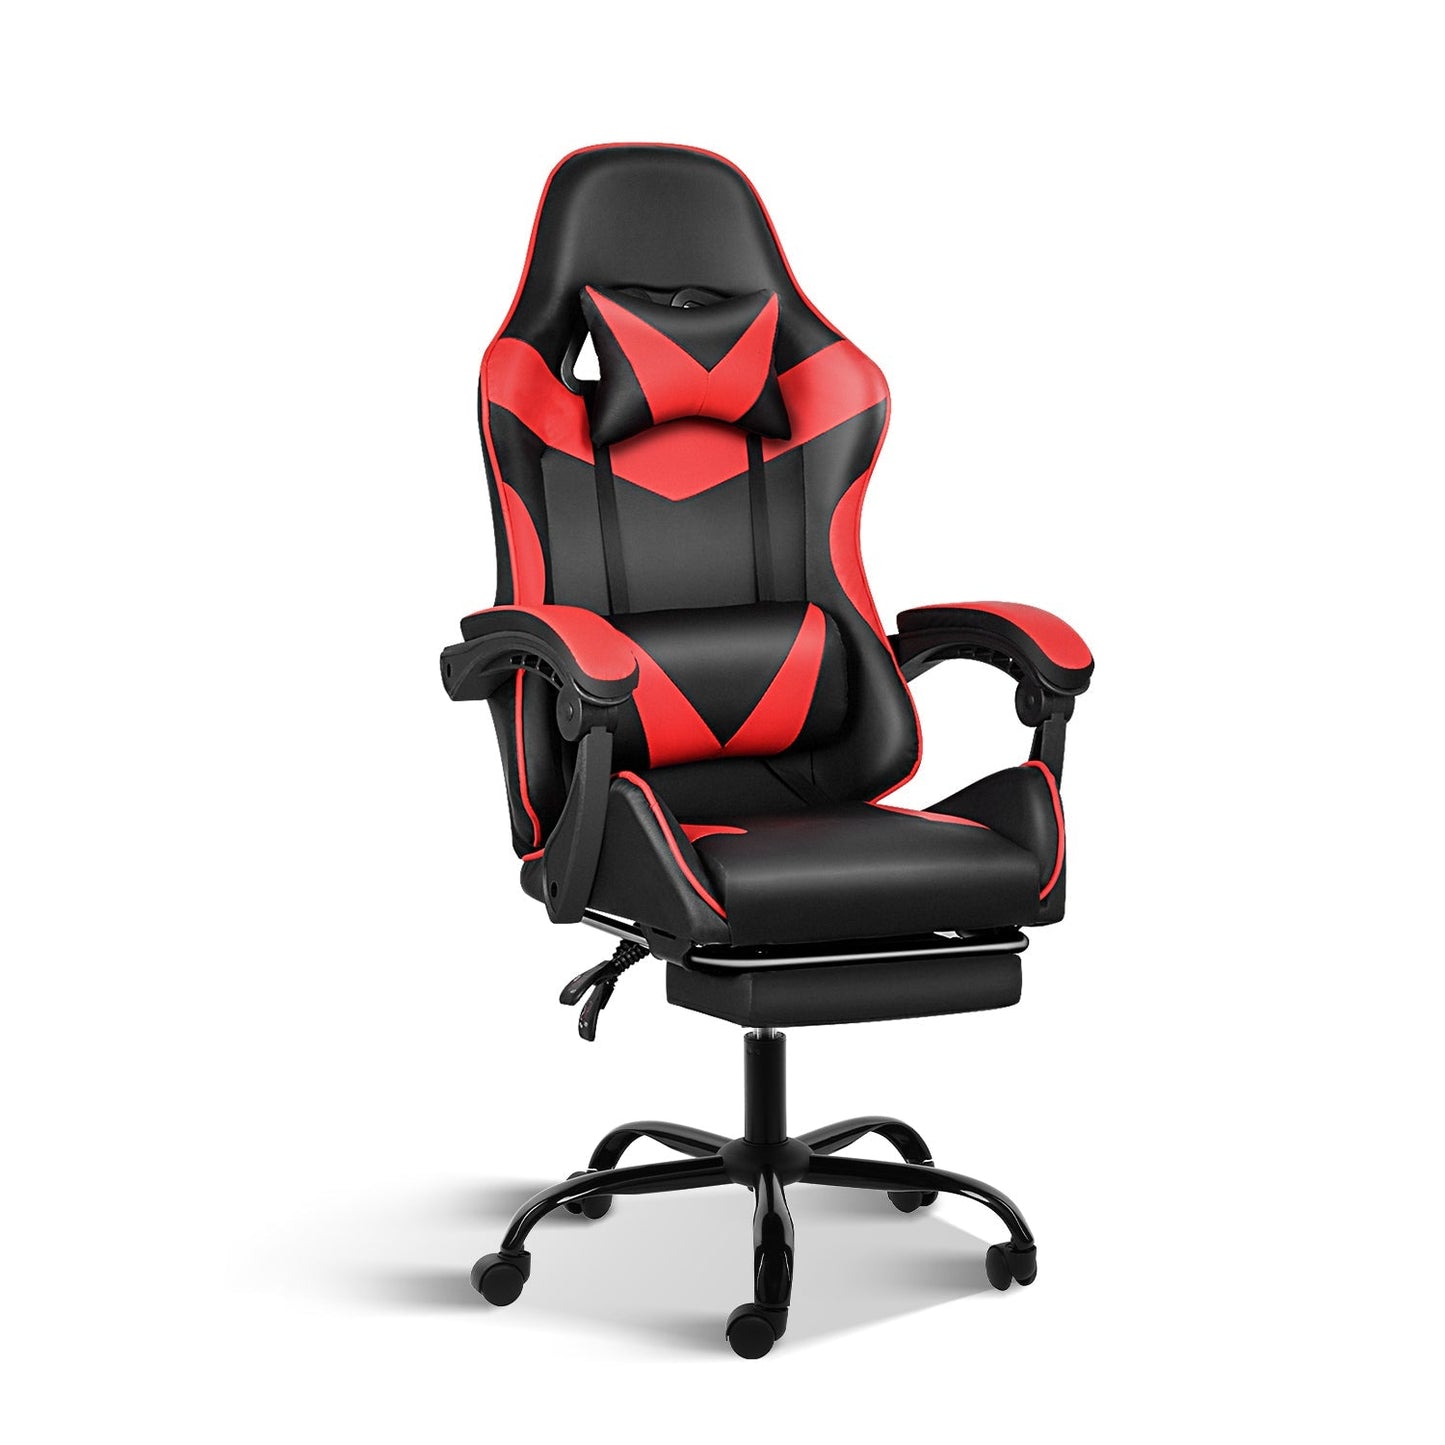 YSSOA Racing Video Backrest and Seat Height Recliner Gaming Office High Back Computer Ergonomic Adjustable Swivel Chair, With footrest, Black/red